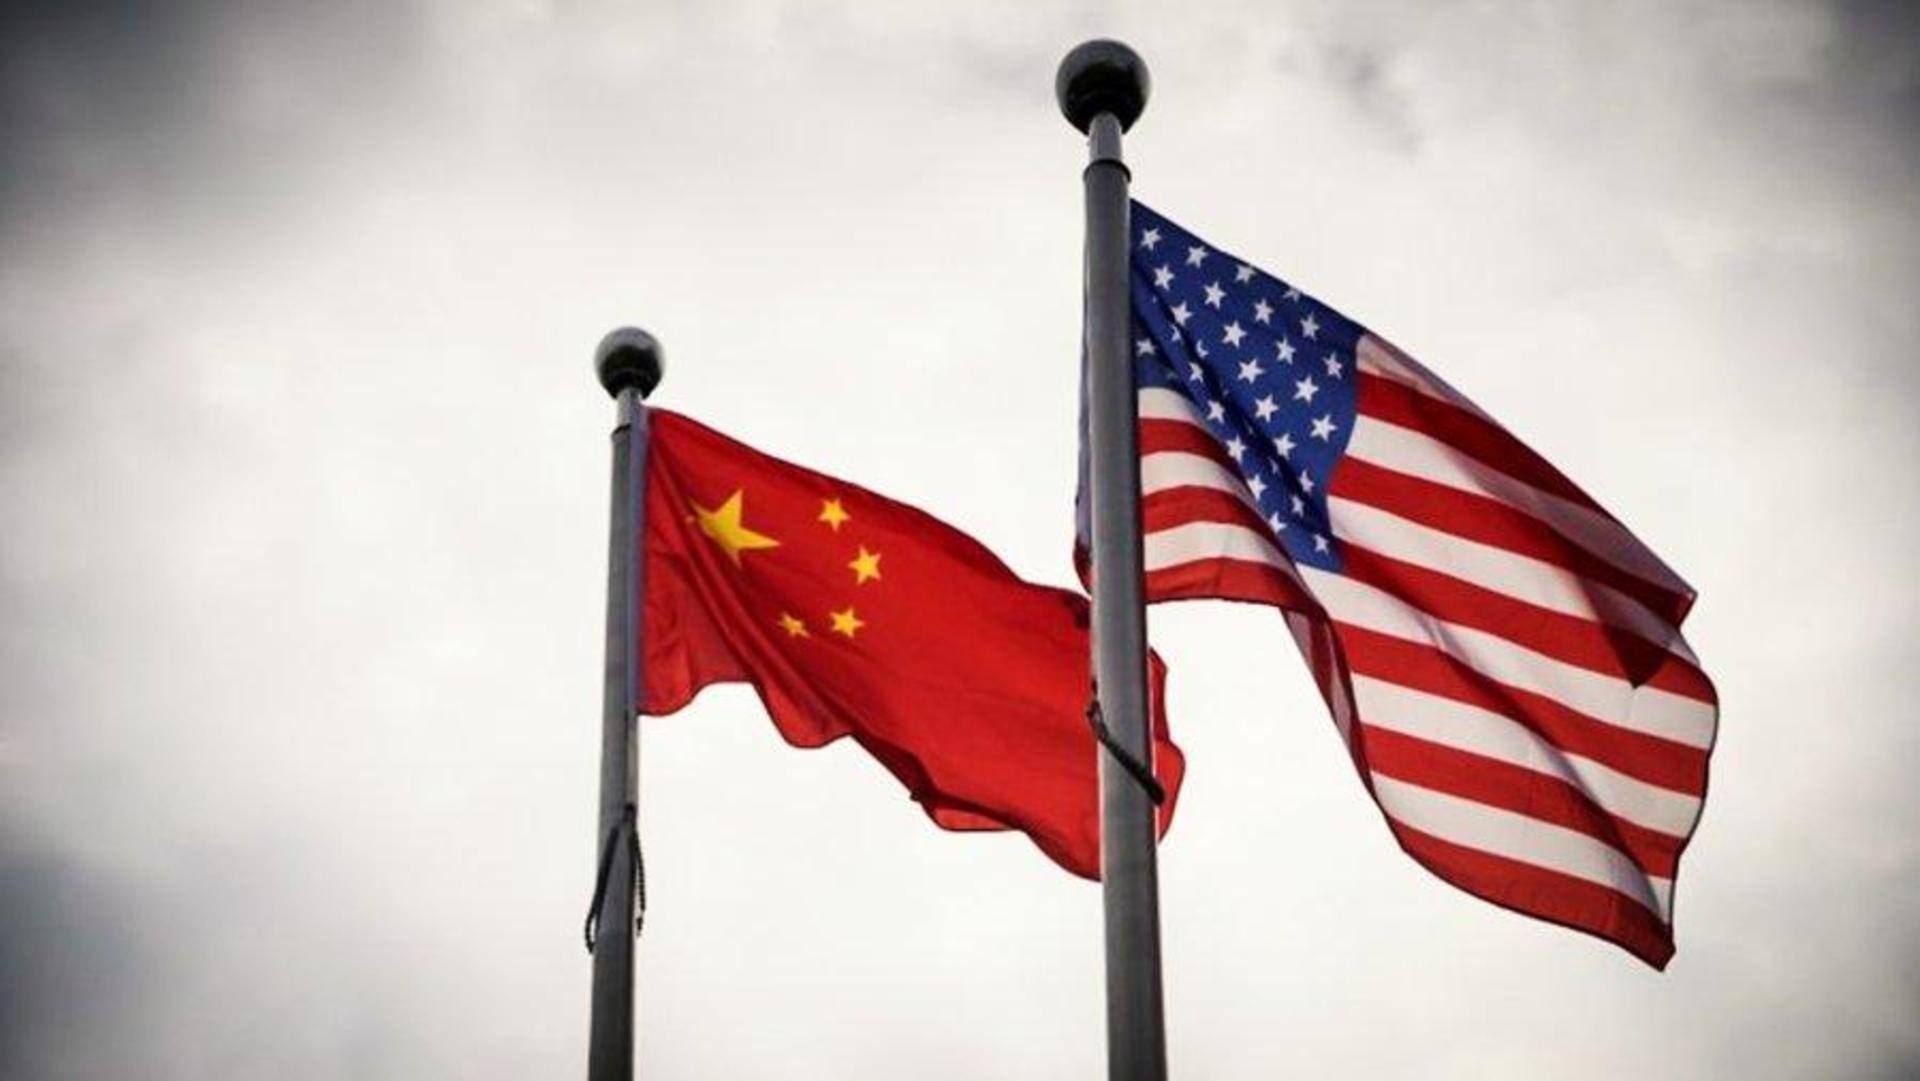 China spying from Cuba, upgraded intelligence in 2019: US official